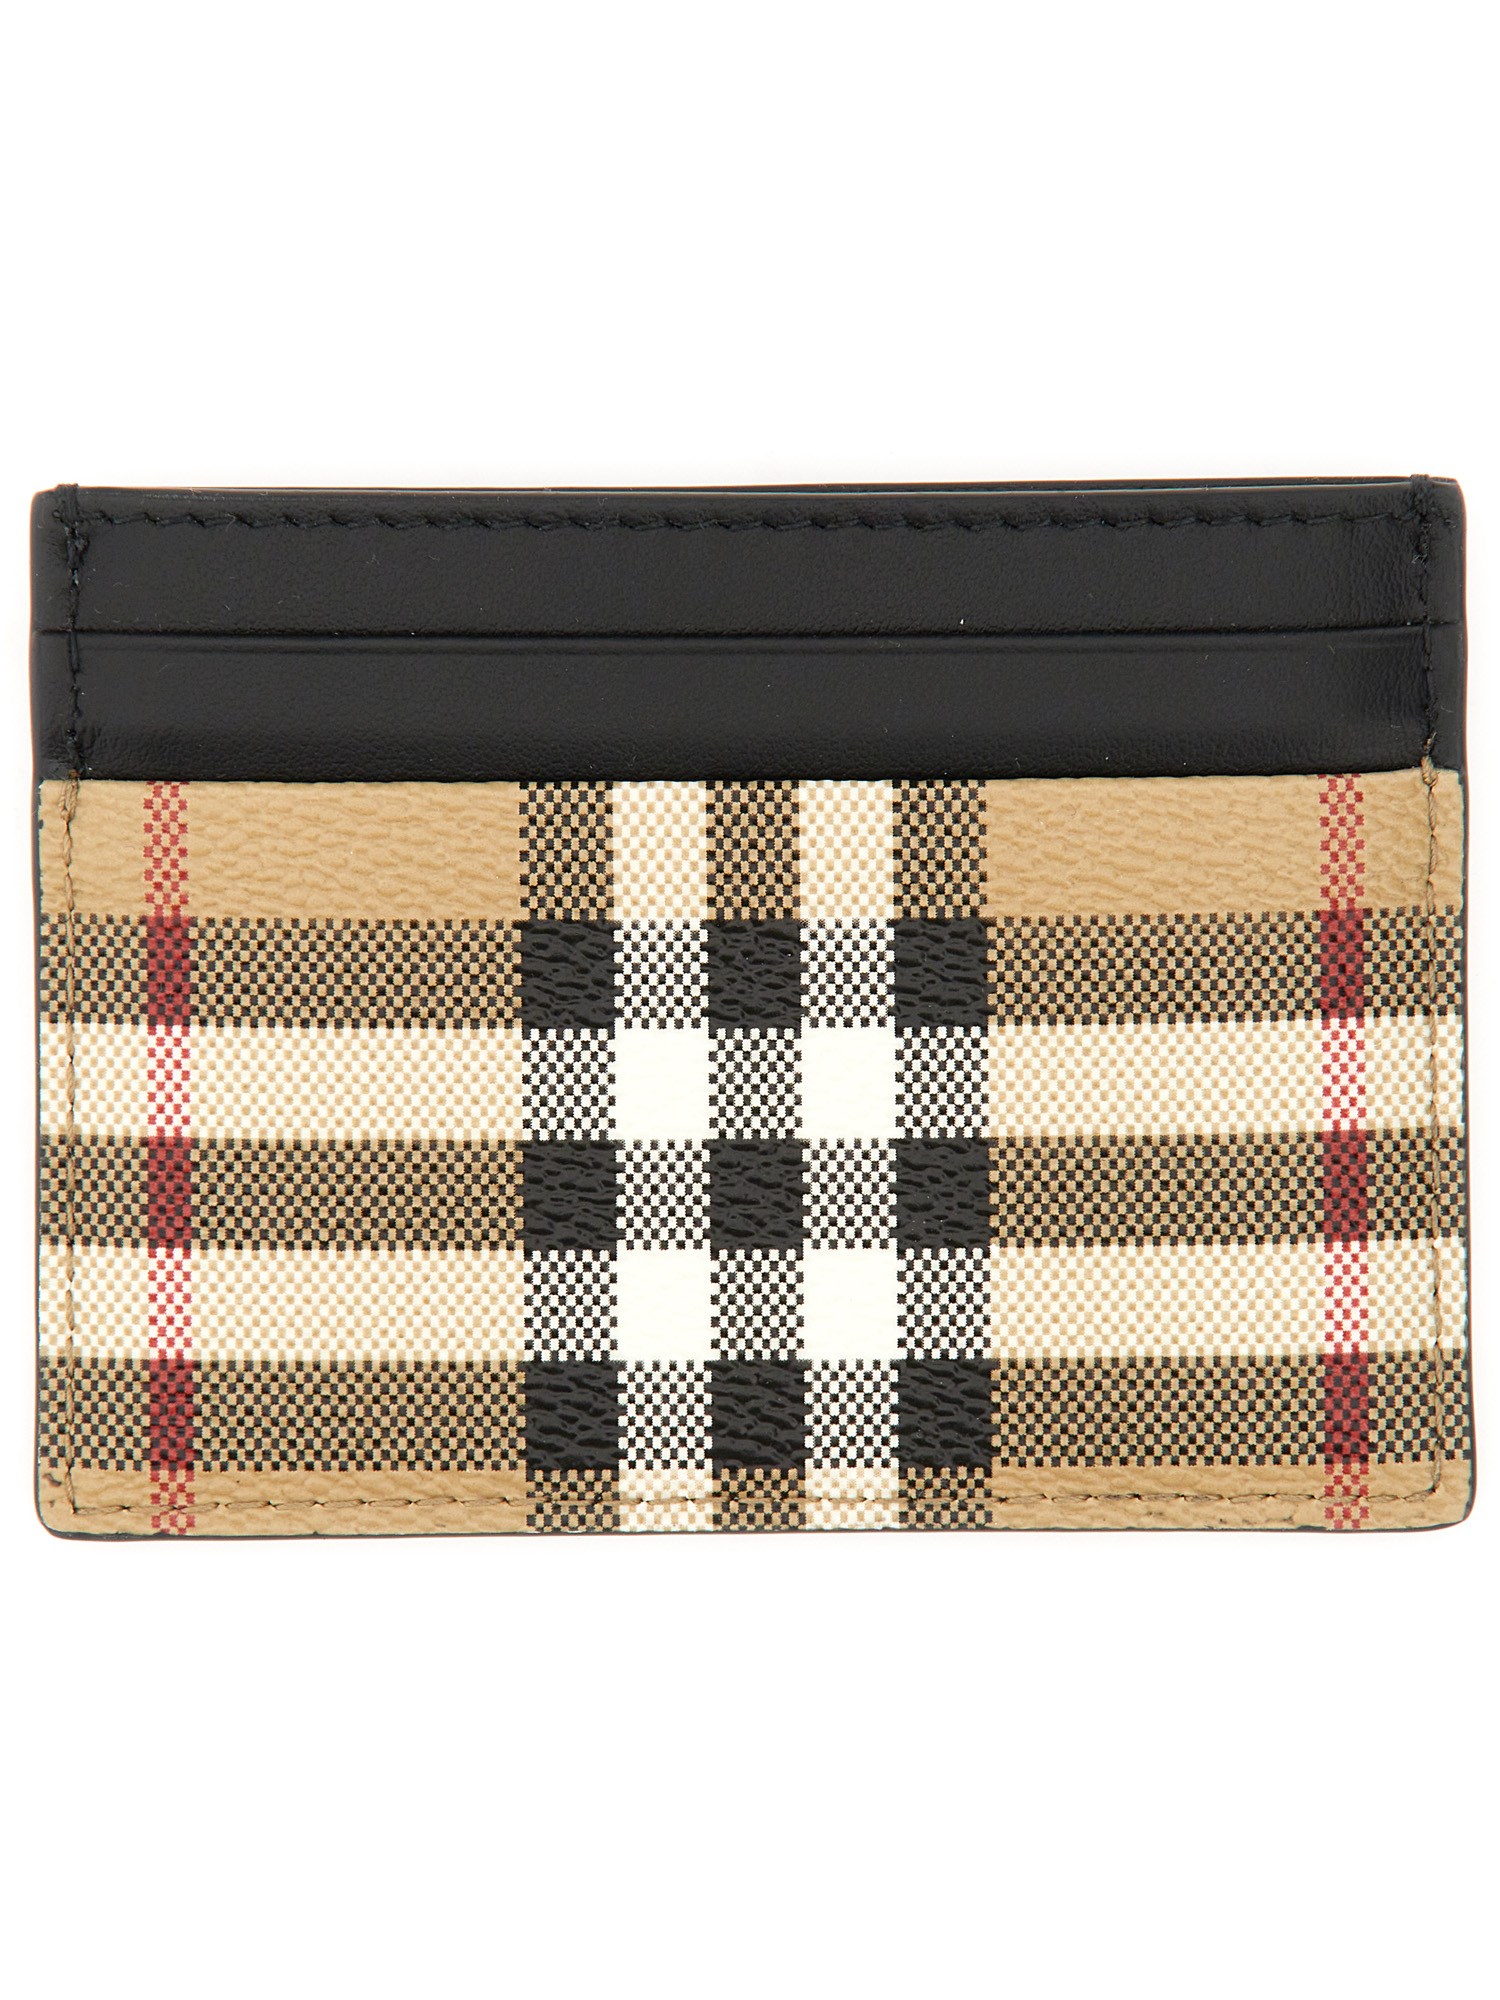 burberry card holder with vintage check pattern